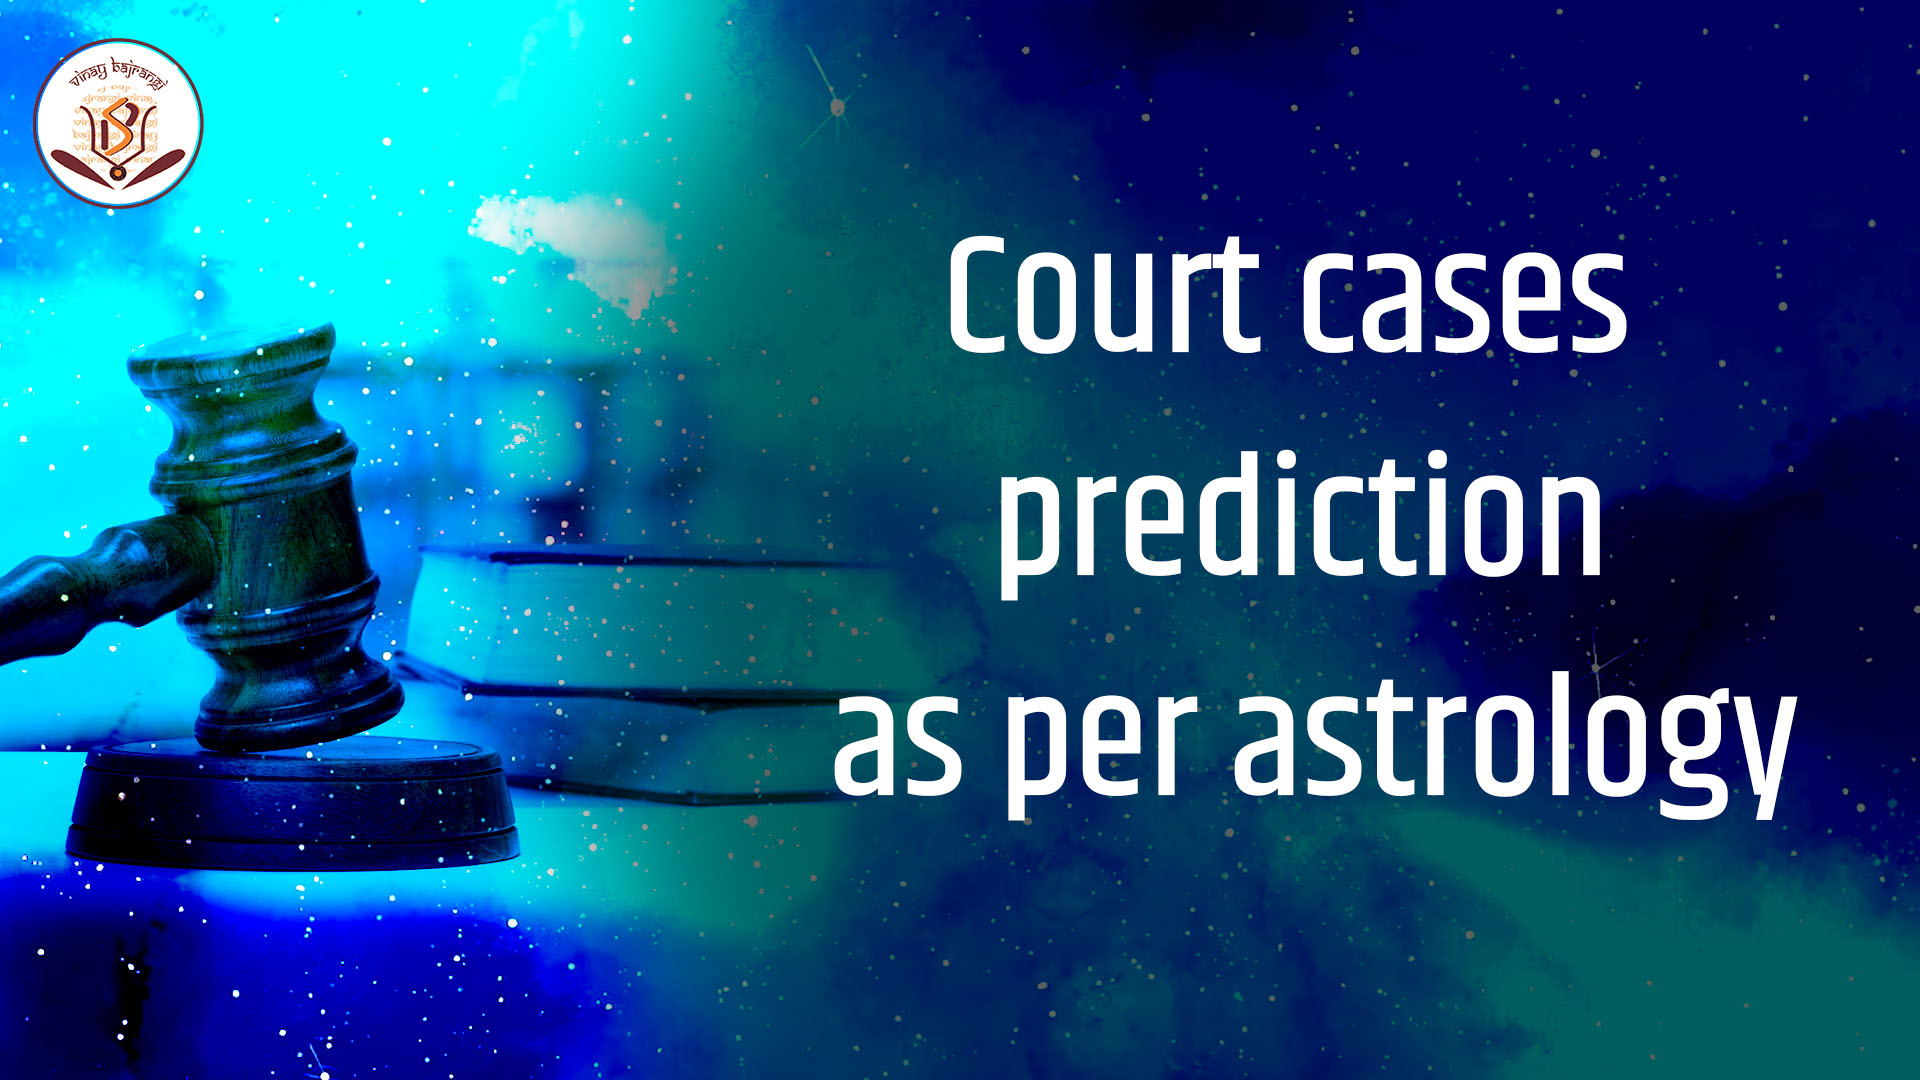 Court cases Legal issues Litigations issues Vedic astrology